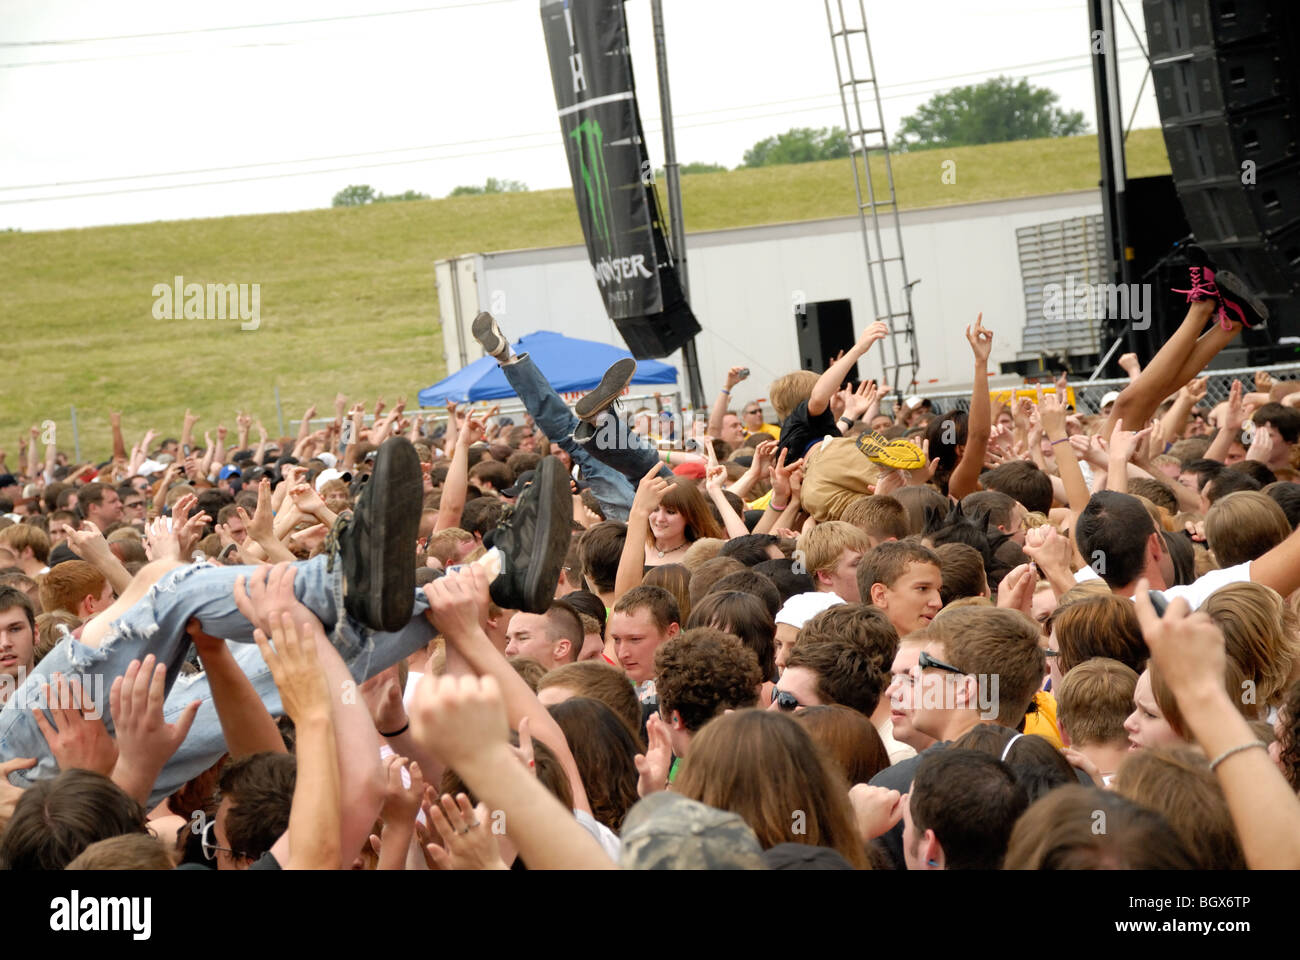 Crowd at an outdoor festival rock concert, where people are being crowd-surfed. Stock Photo